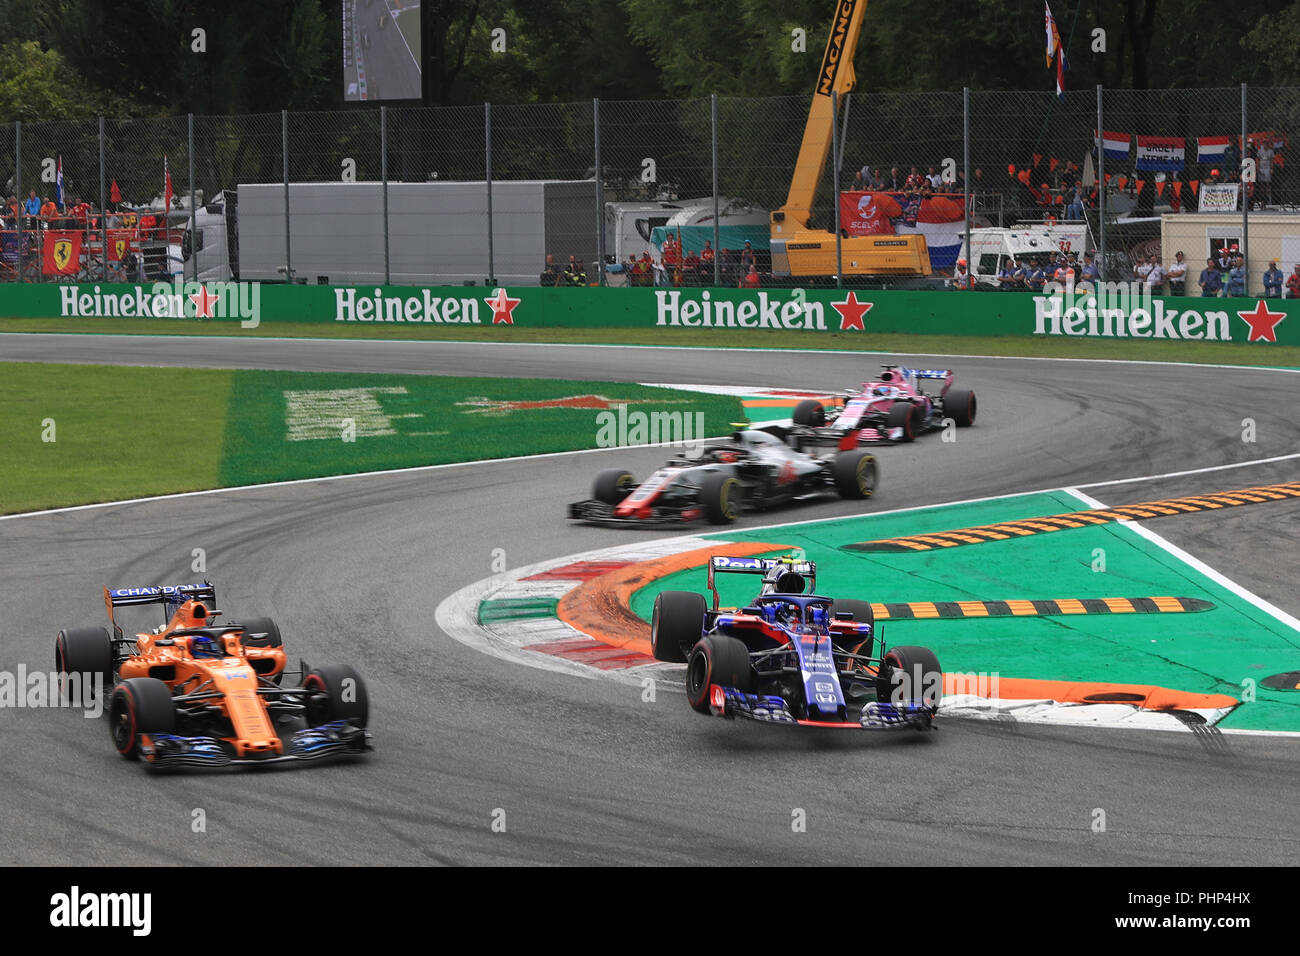 Monza, Italy. 2 September 2018. Formula One Grand Prix of Italy